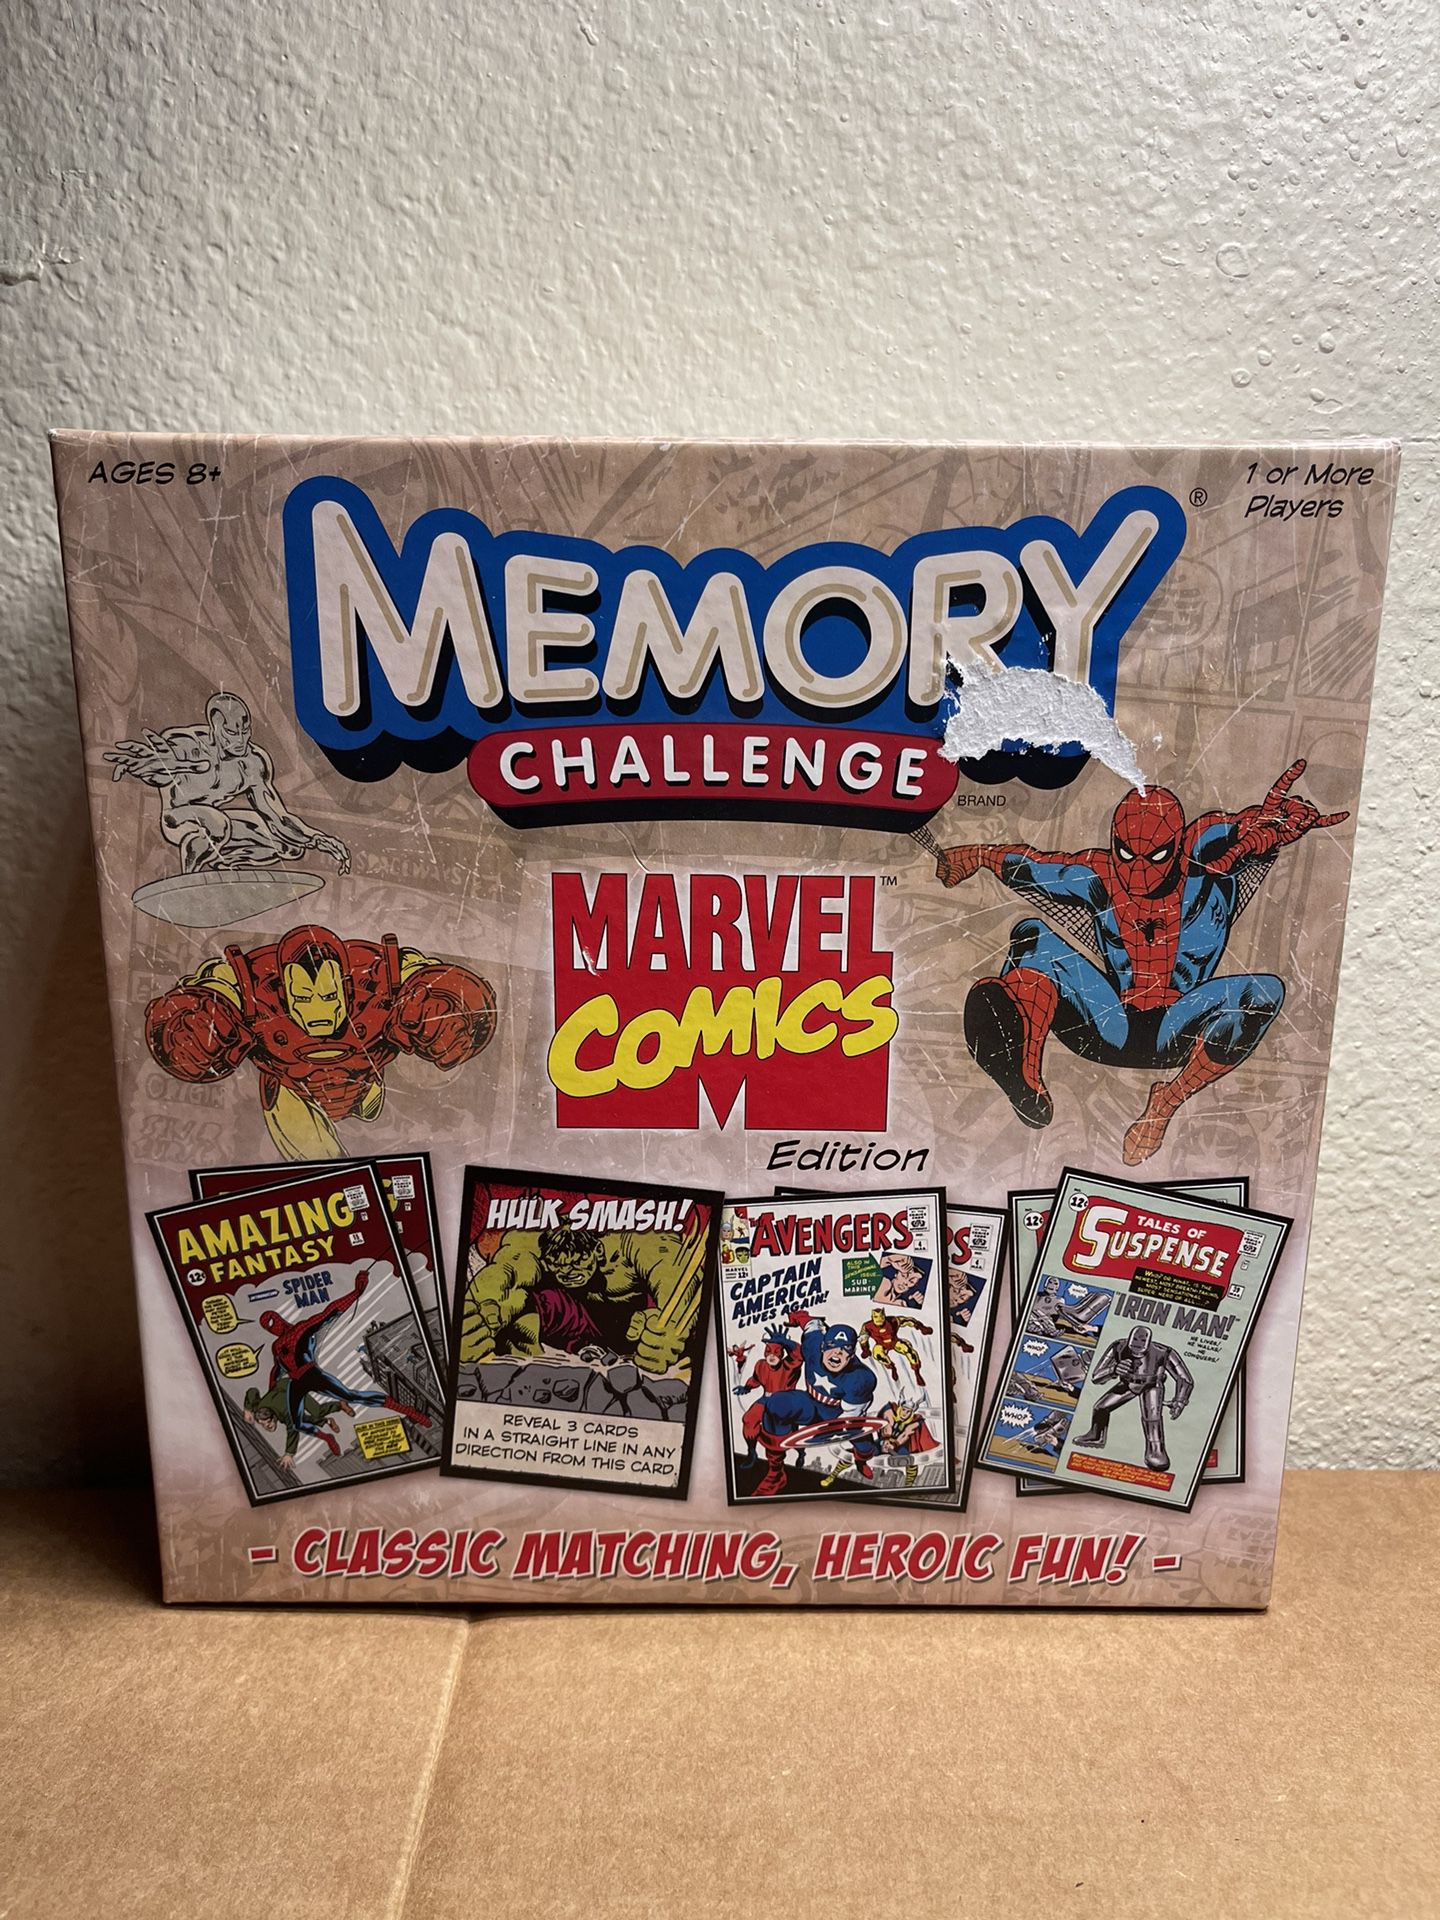 Memory Challenge Marvel Comics Edition Matching Game Complete, USAopoly